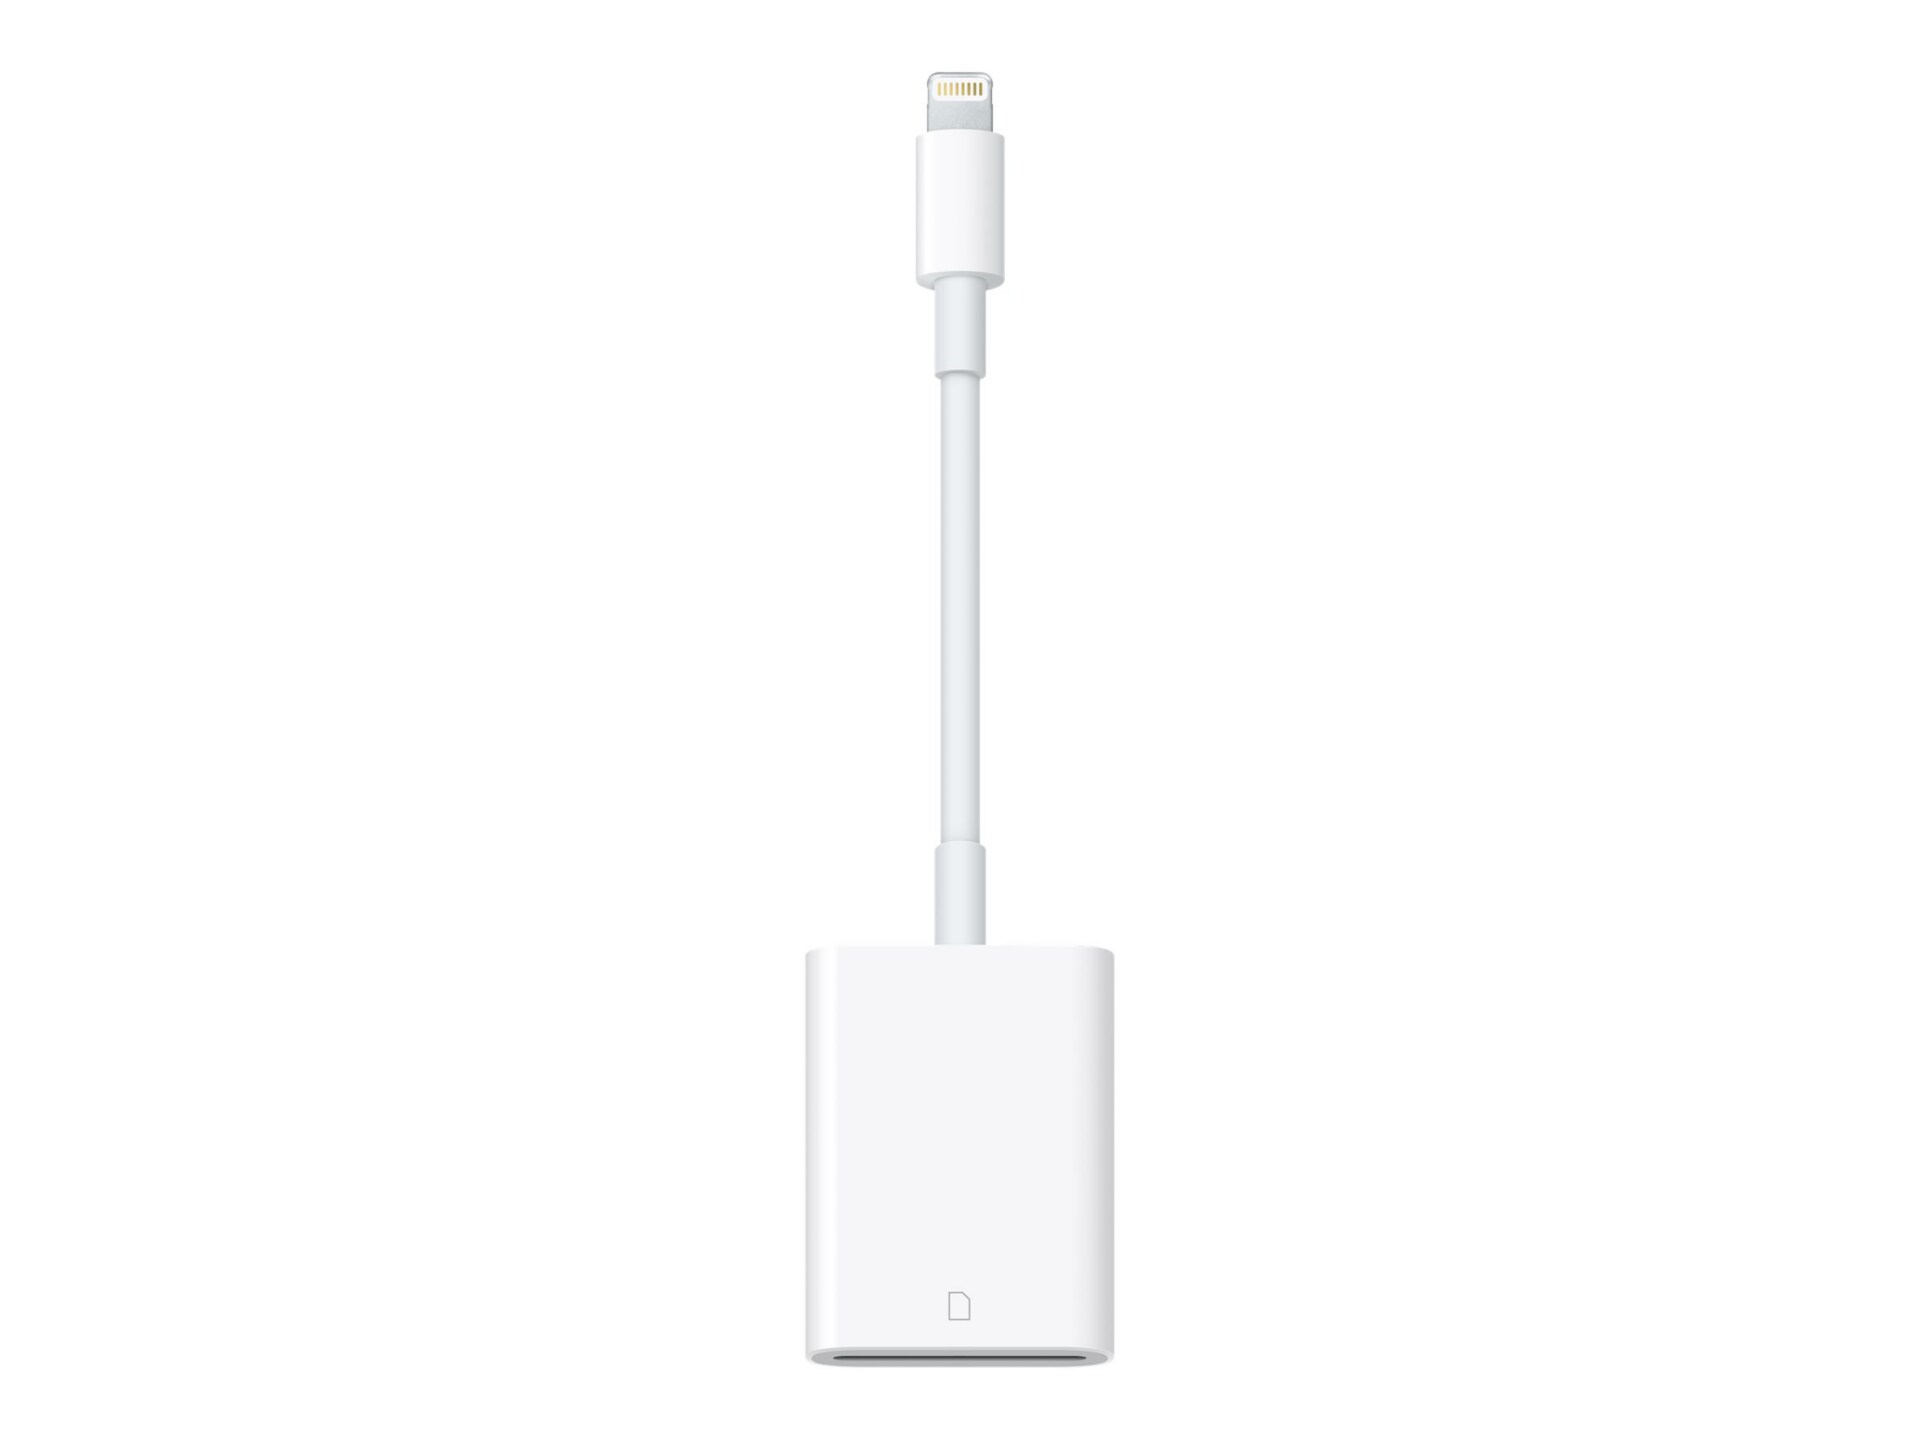 Review Apple S Usb 3 Lightning To Sd Card Camera Reader Offers Only Modest Speed Benefits For Now 9to5mac